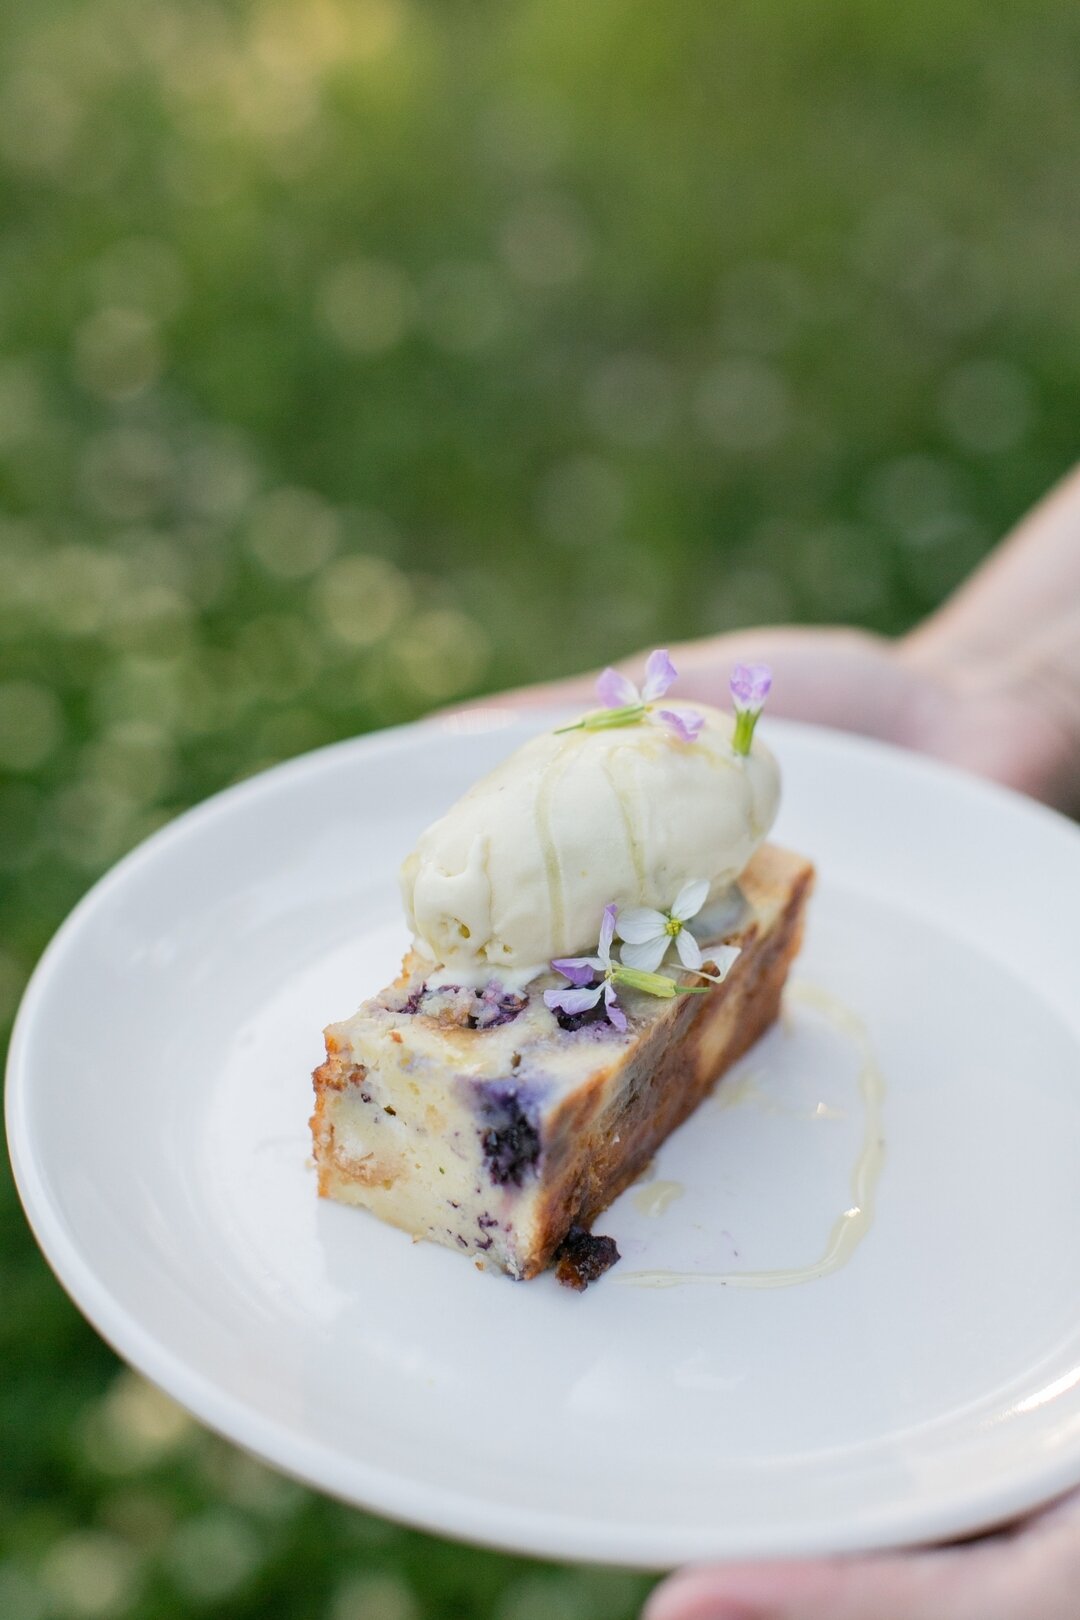 From picnics to patio parties, desserts like our Blueberry Bread Pudding make it better! #homespunatl

Photo by @jashleyphotography for @artfarmserenbe
Location @serenbe